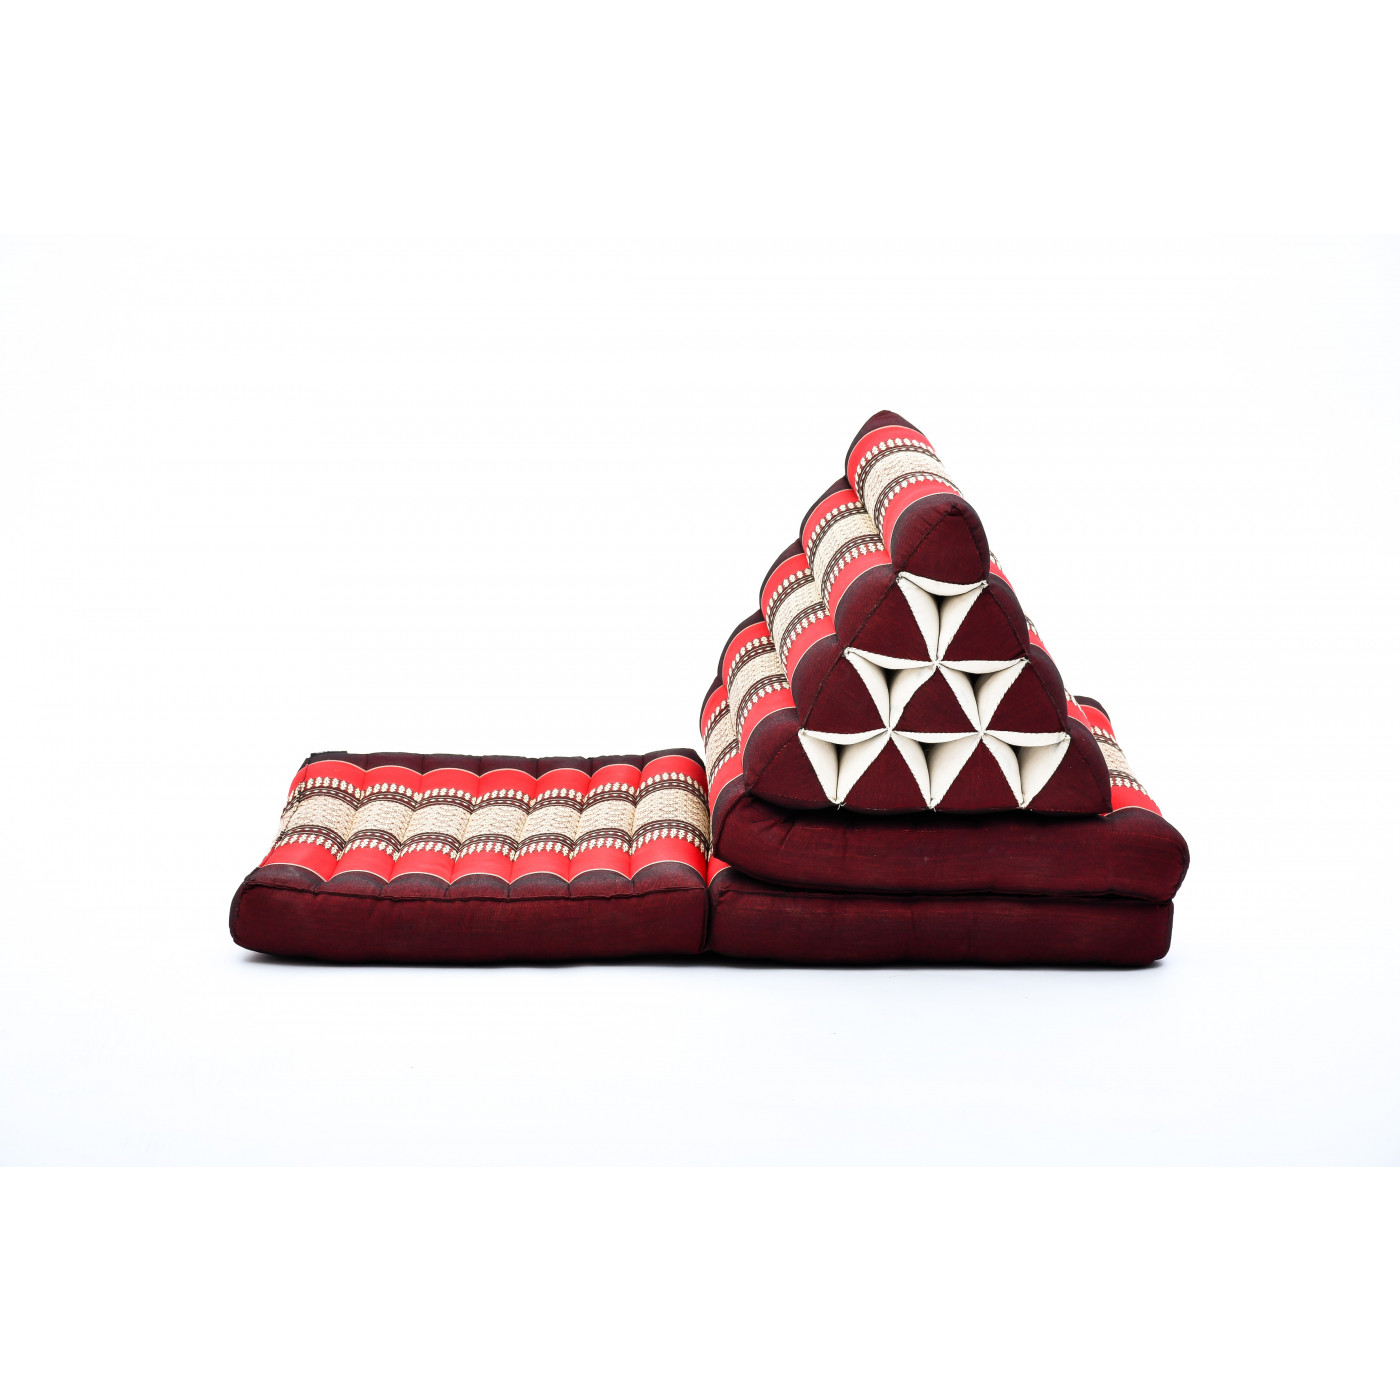 Thai 3-fold mat triangle cushion kapok filled chill daybed cotton design red 